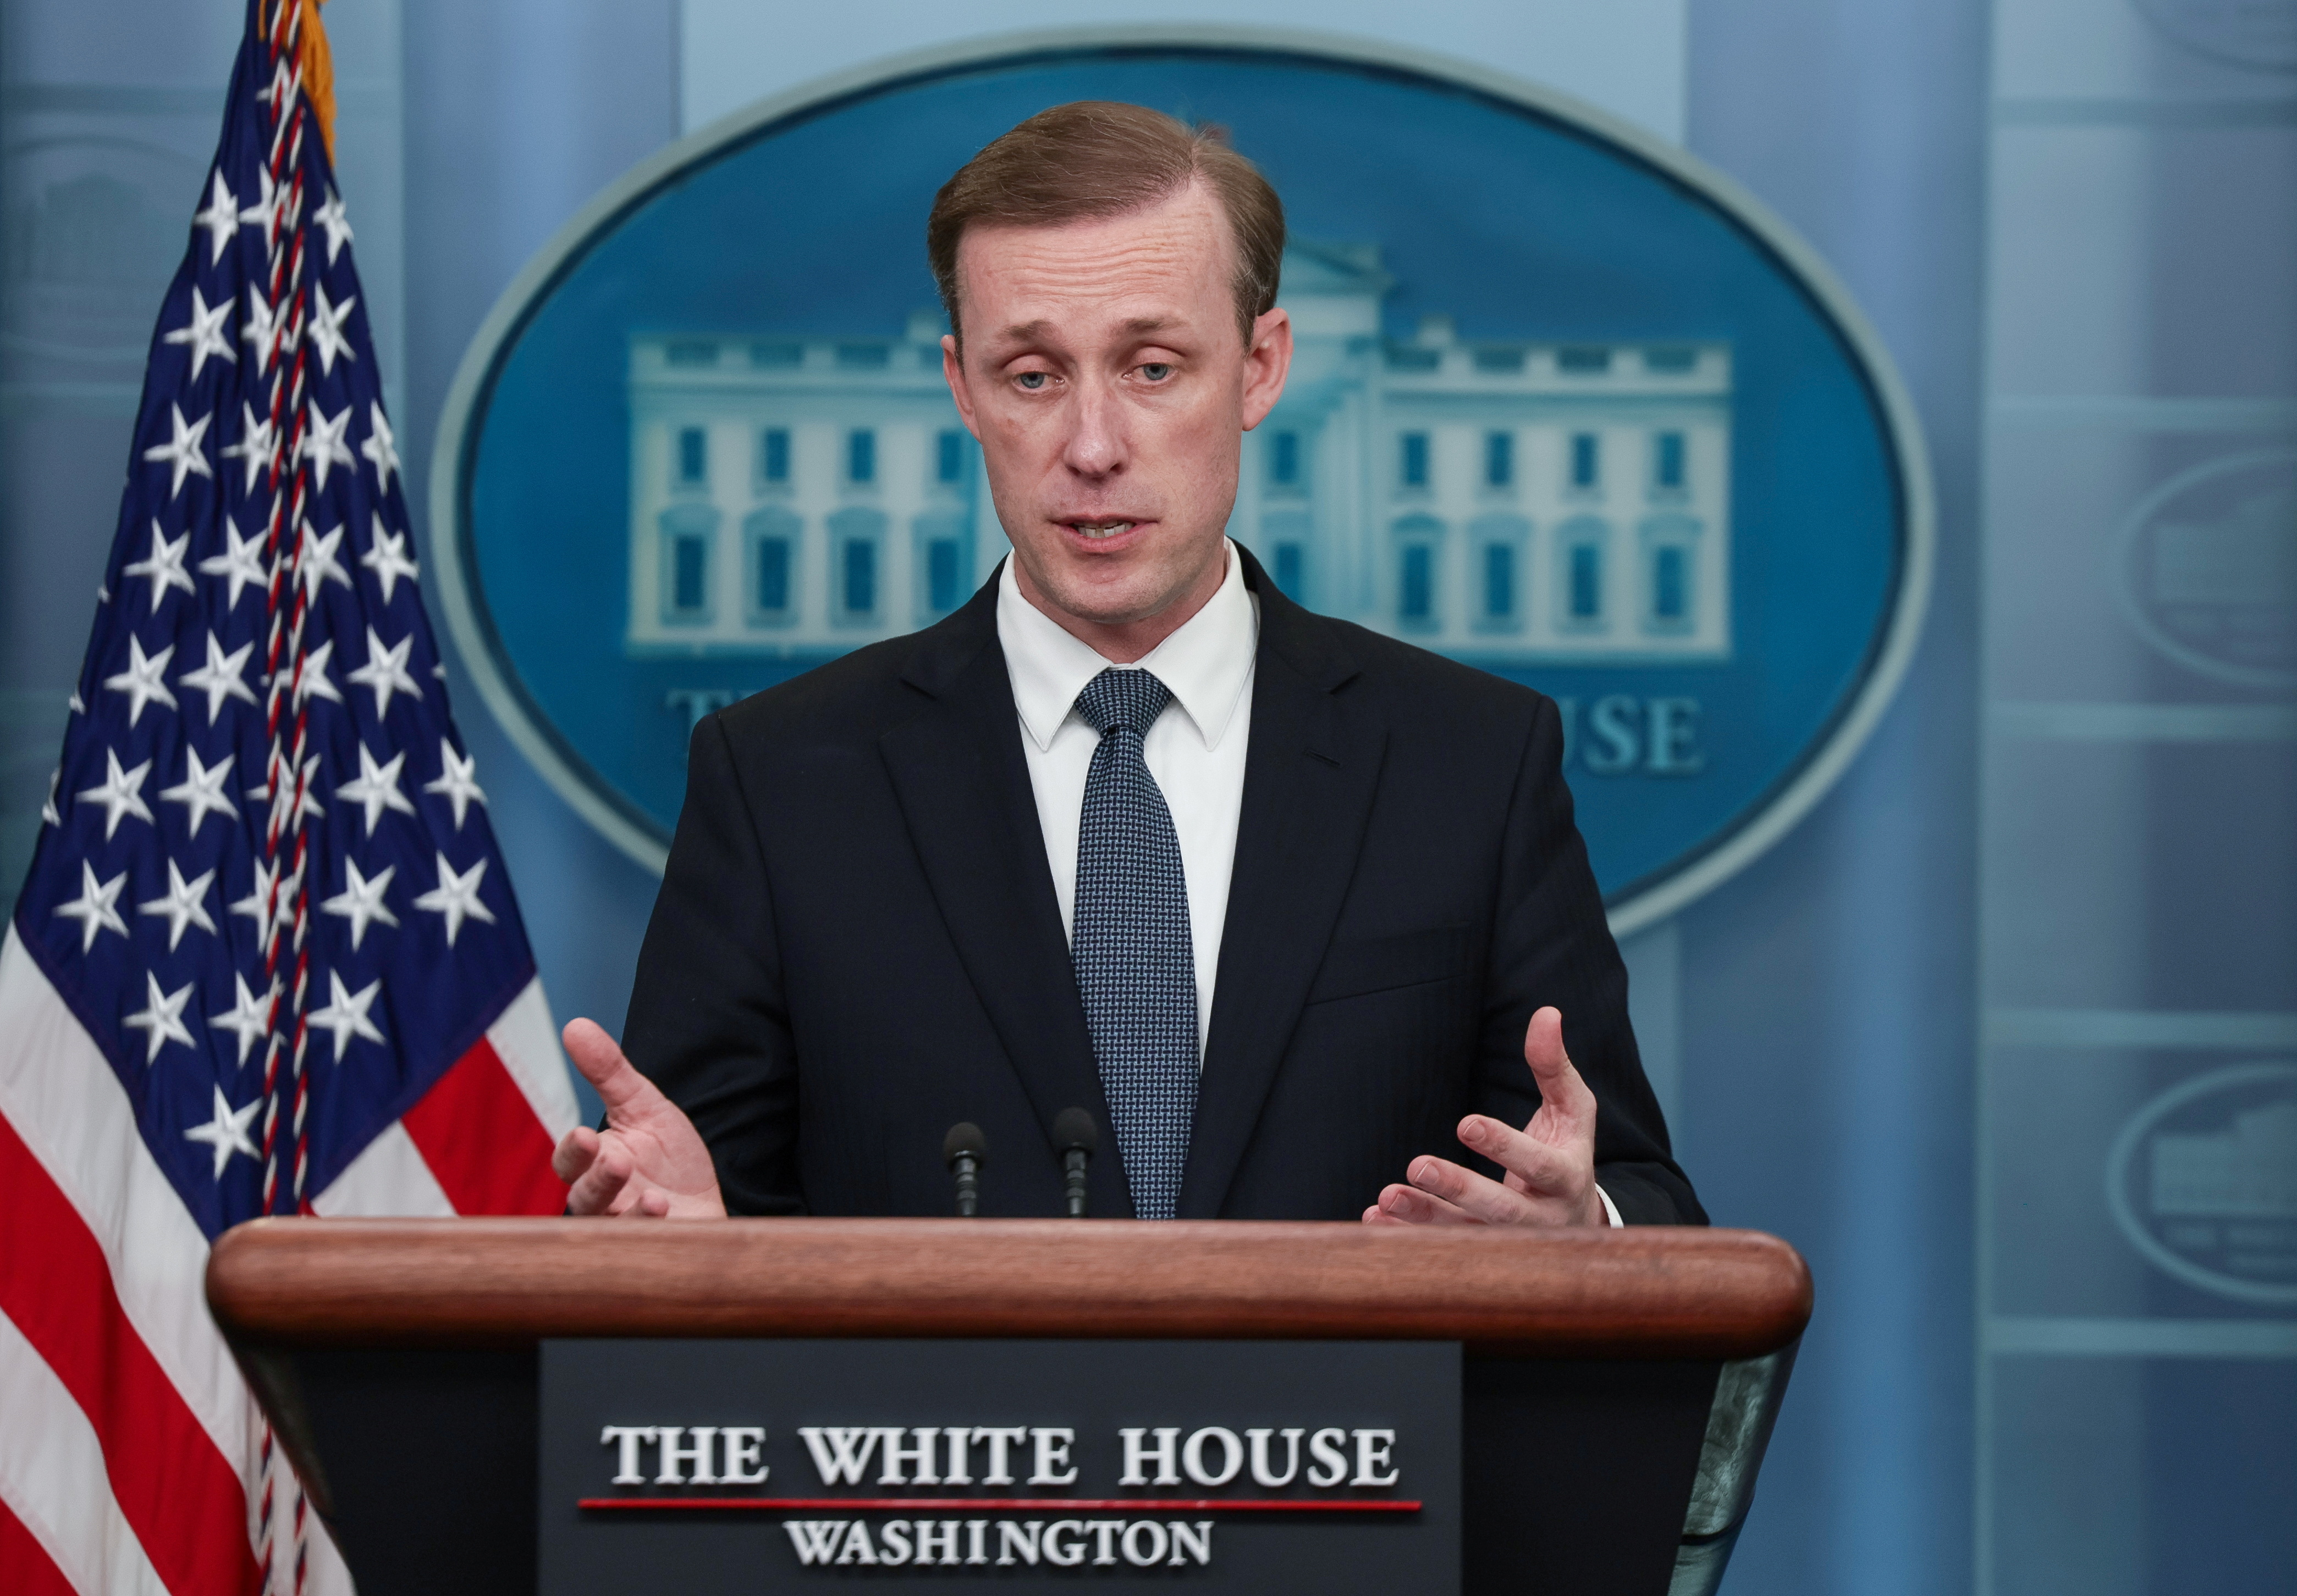 National Security Advisor Jake Sullivan answers questions during a media briefing at the White House in Washington